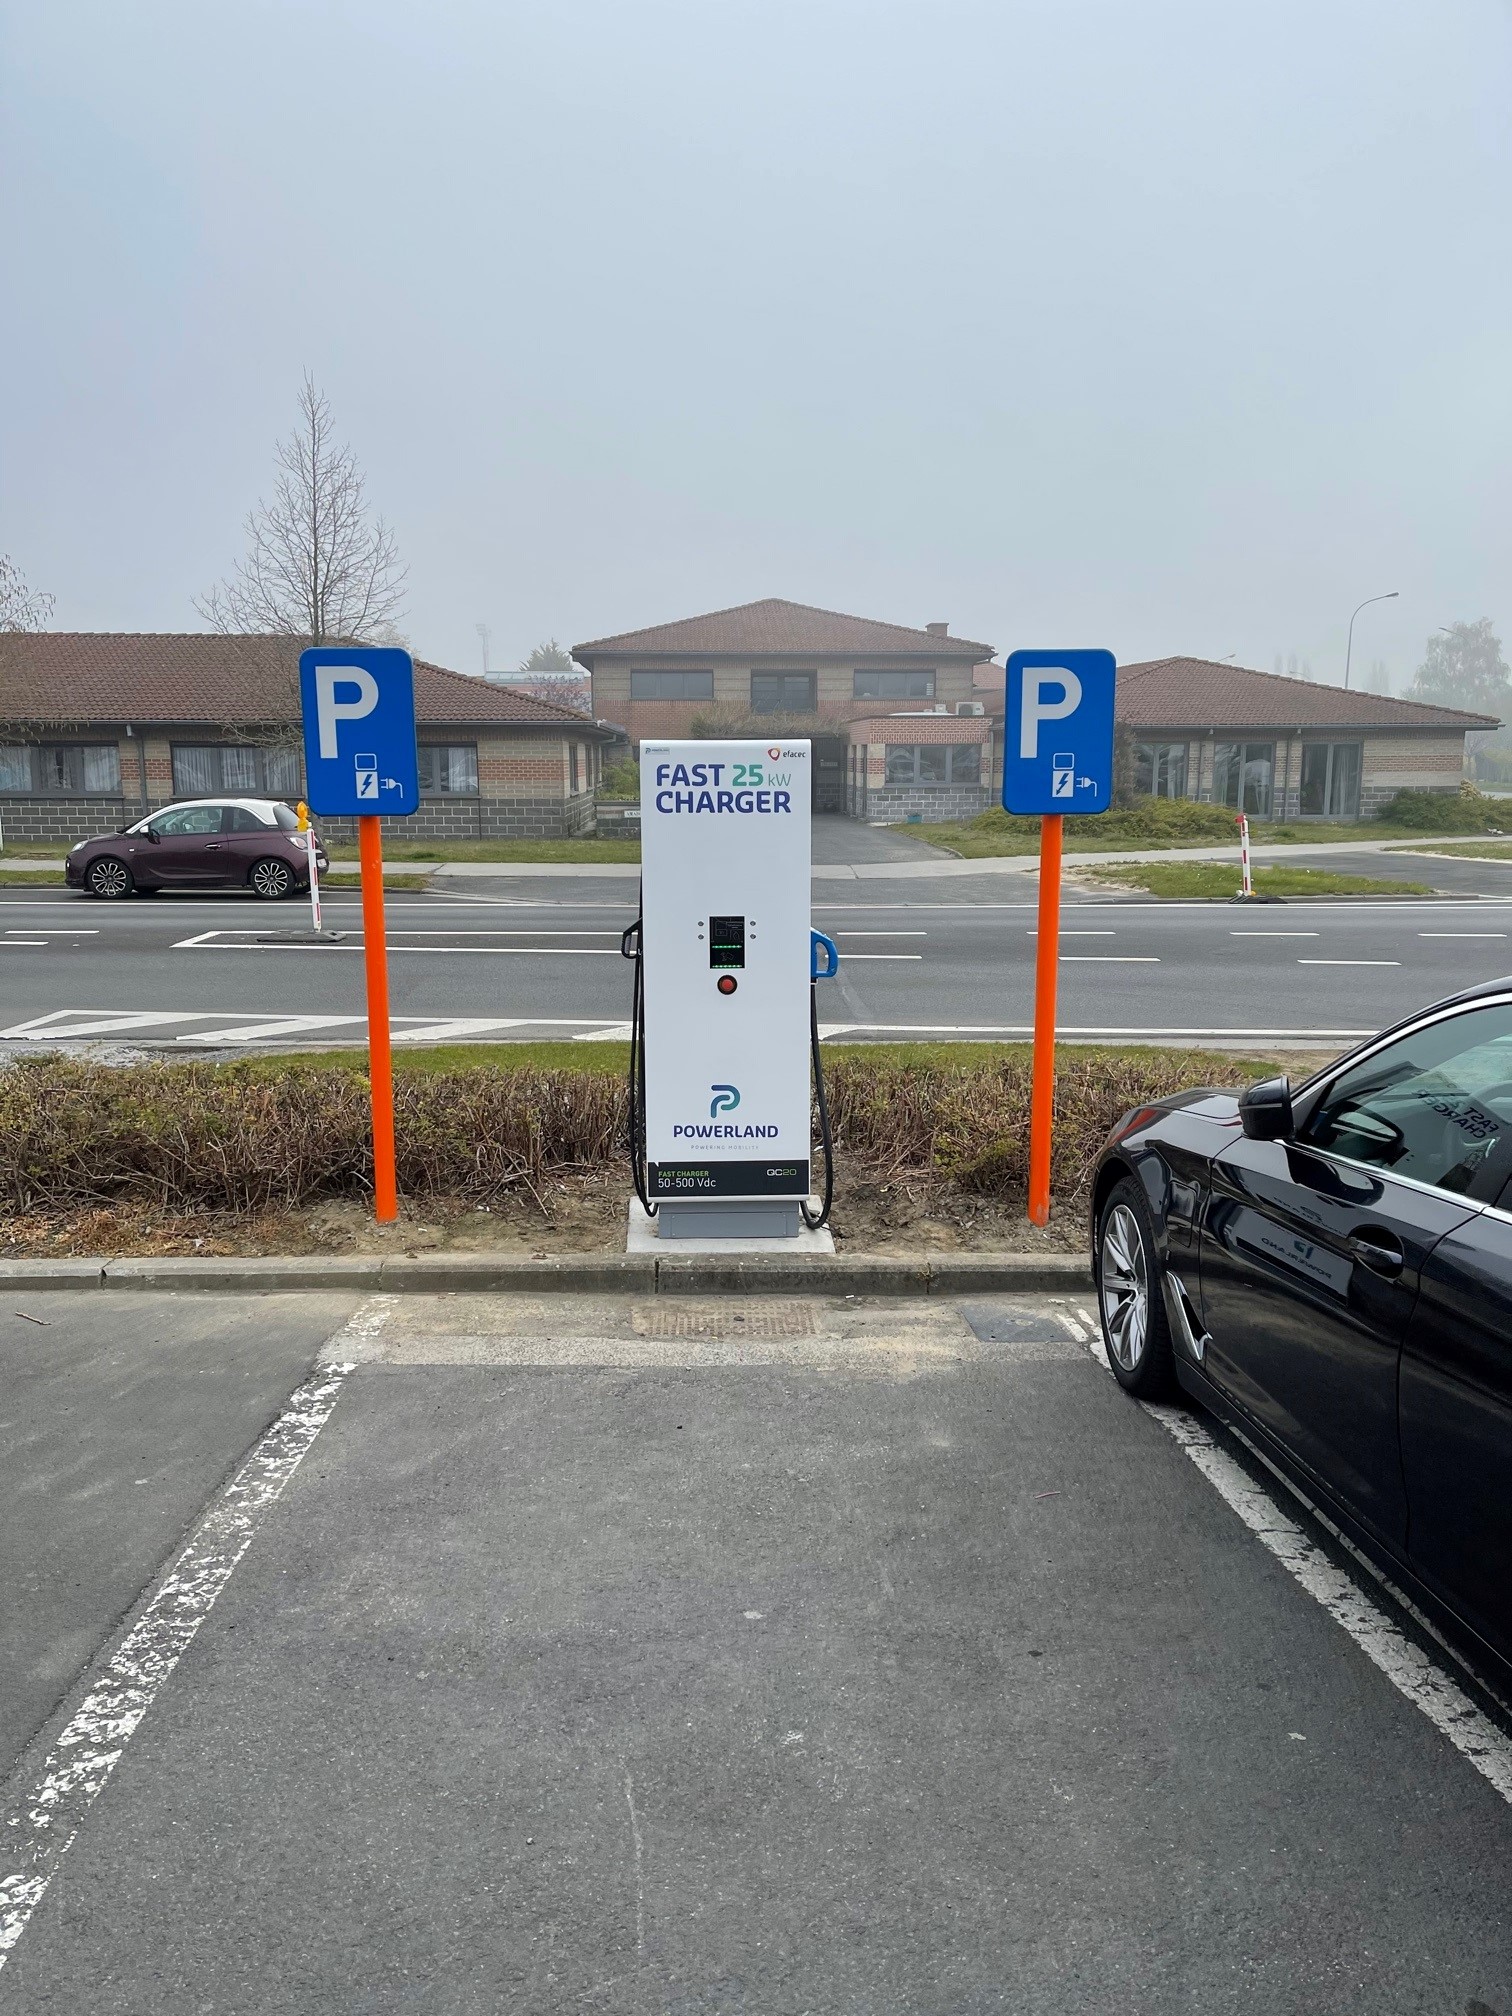 Fast Charger 25kW by Intermarché Moeskroen